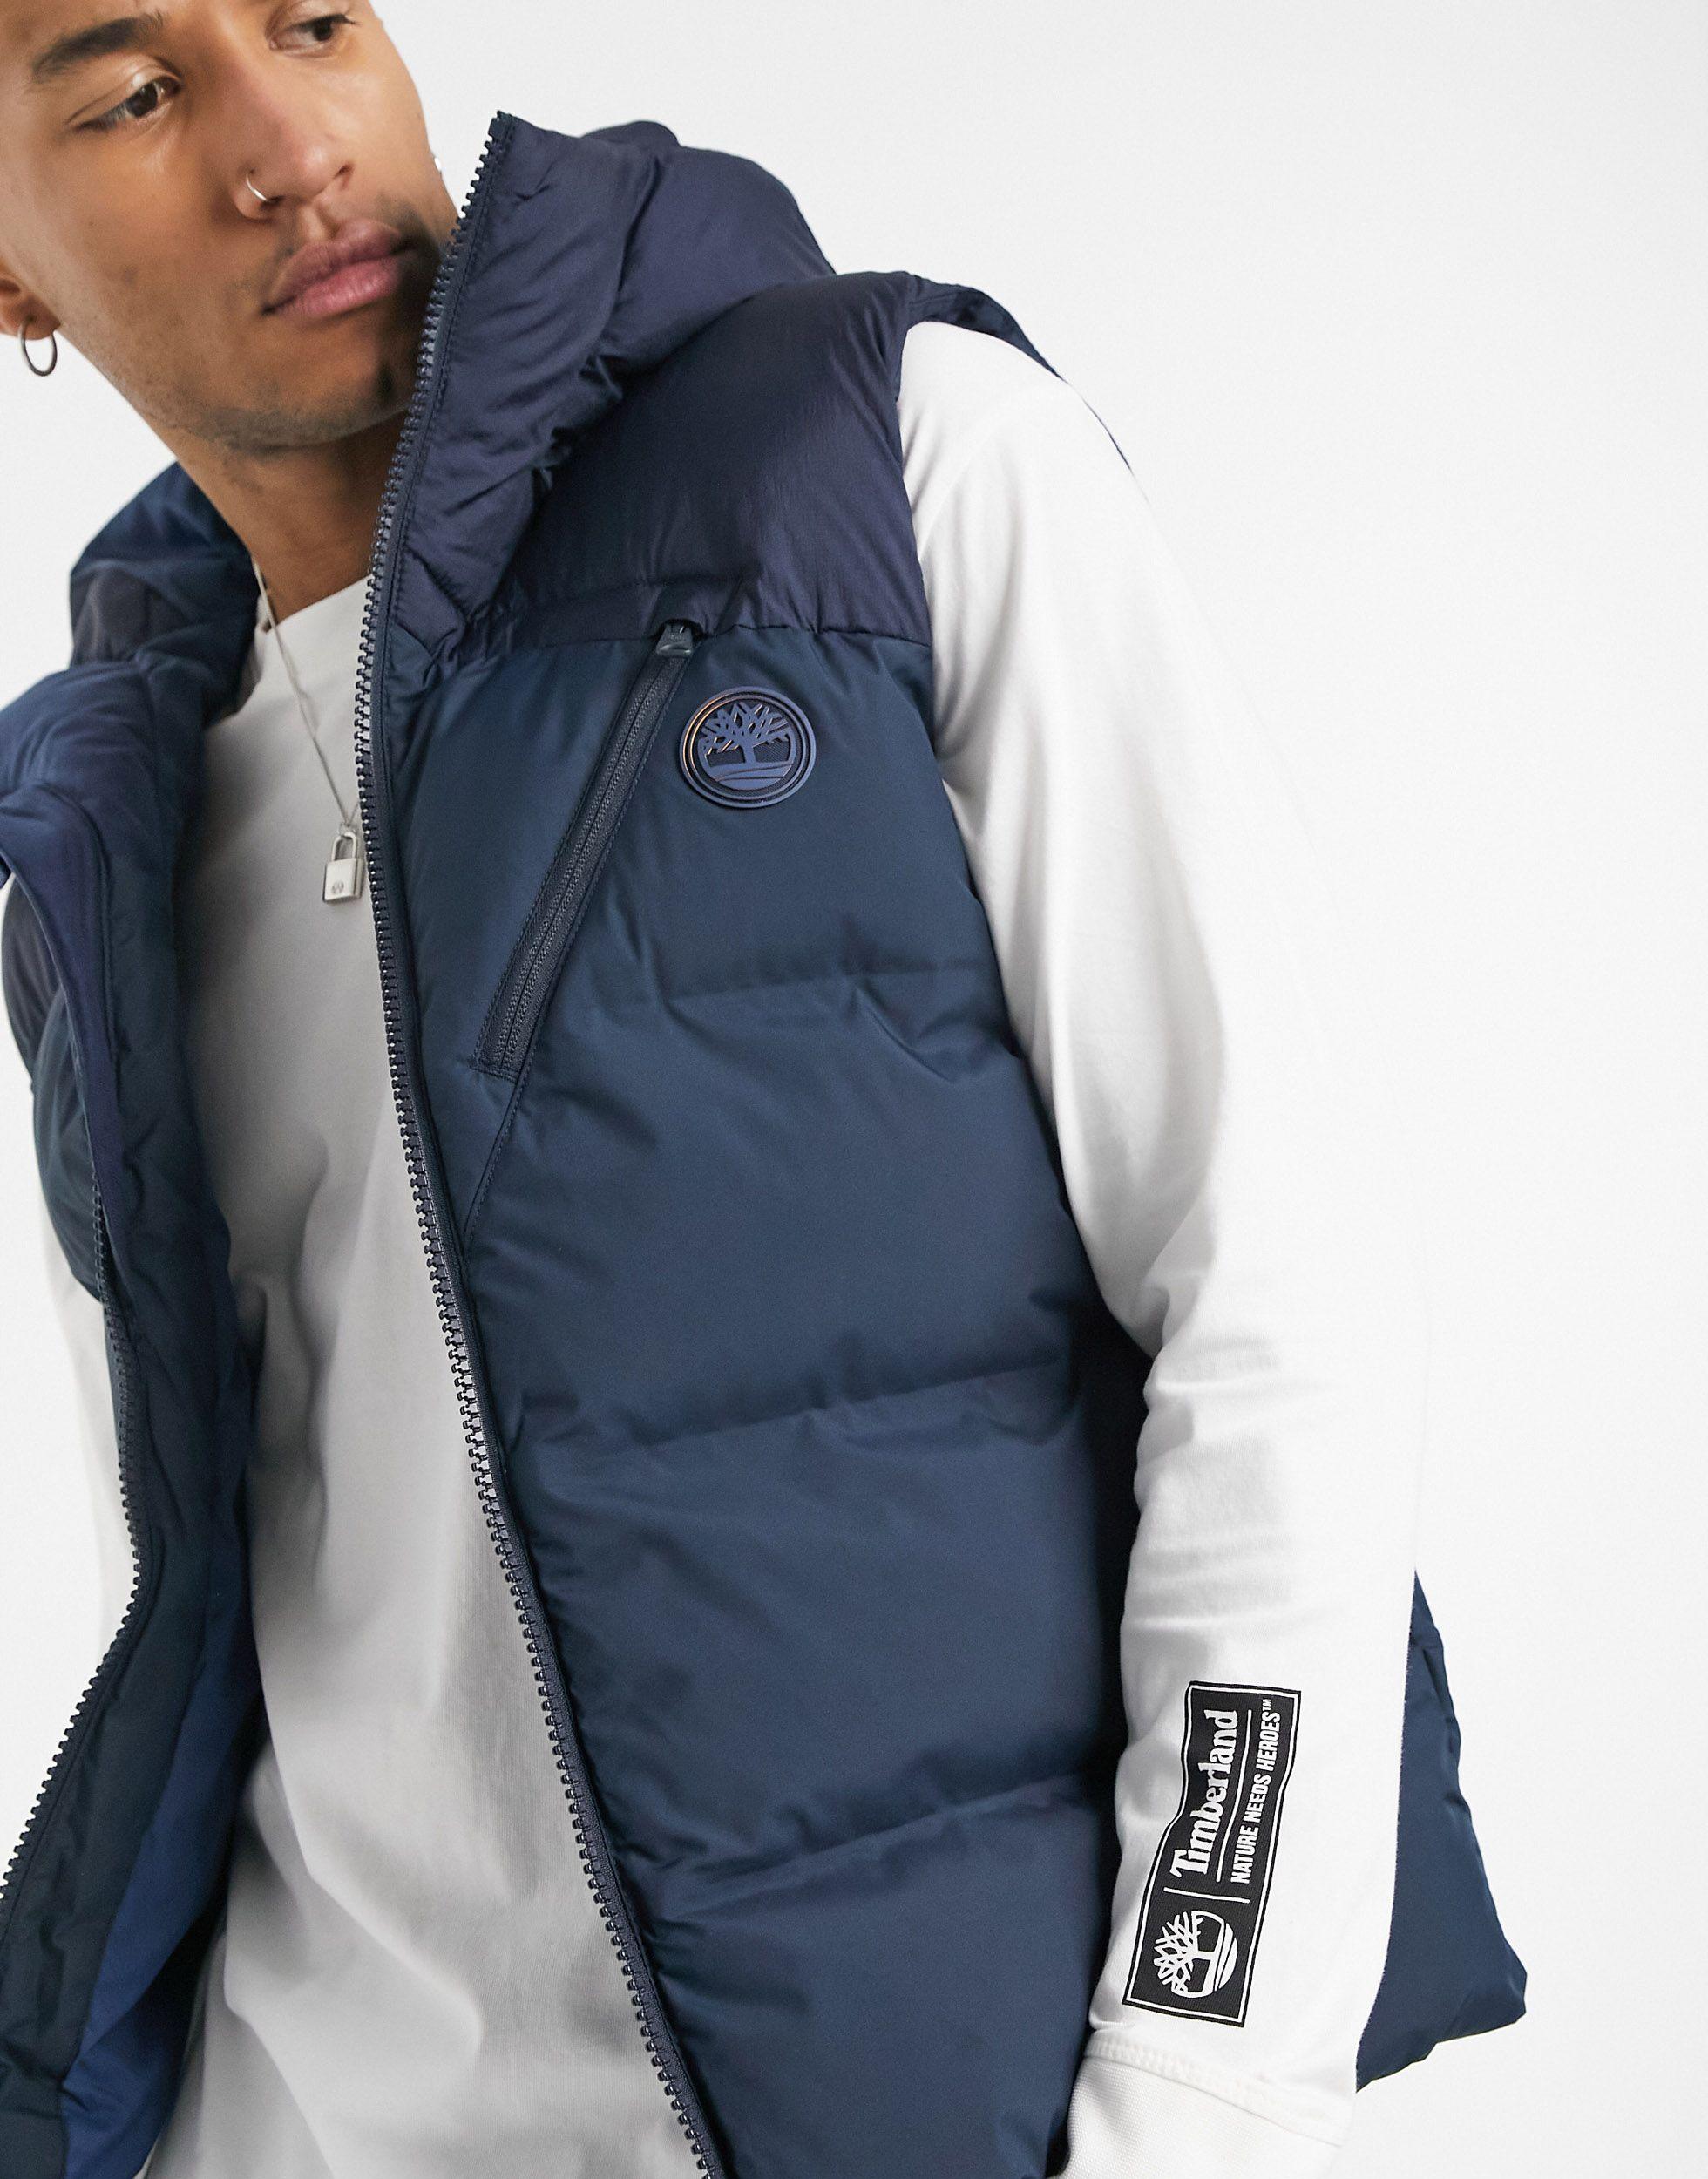 Timberland Neo Summit Gilet in Navy (Blue) for Men - Lyst